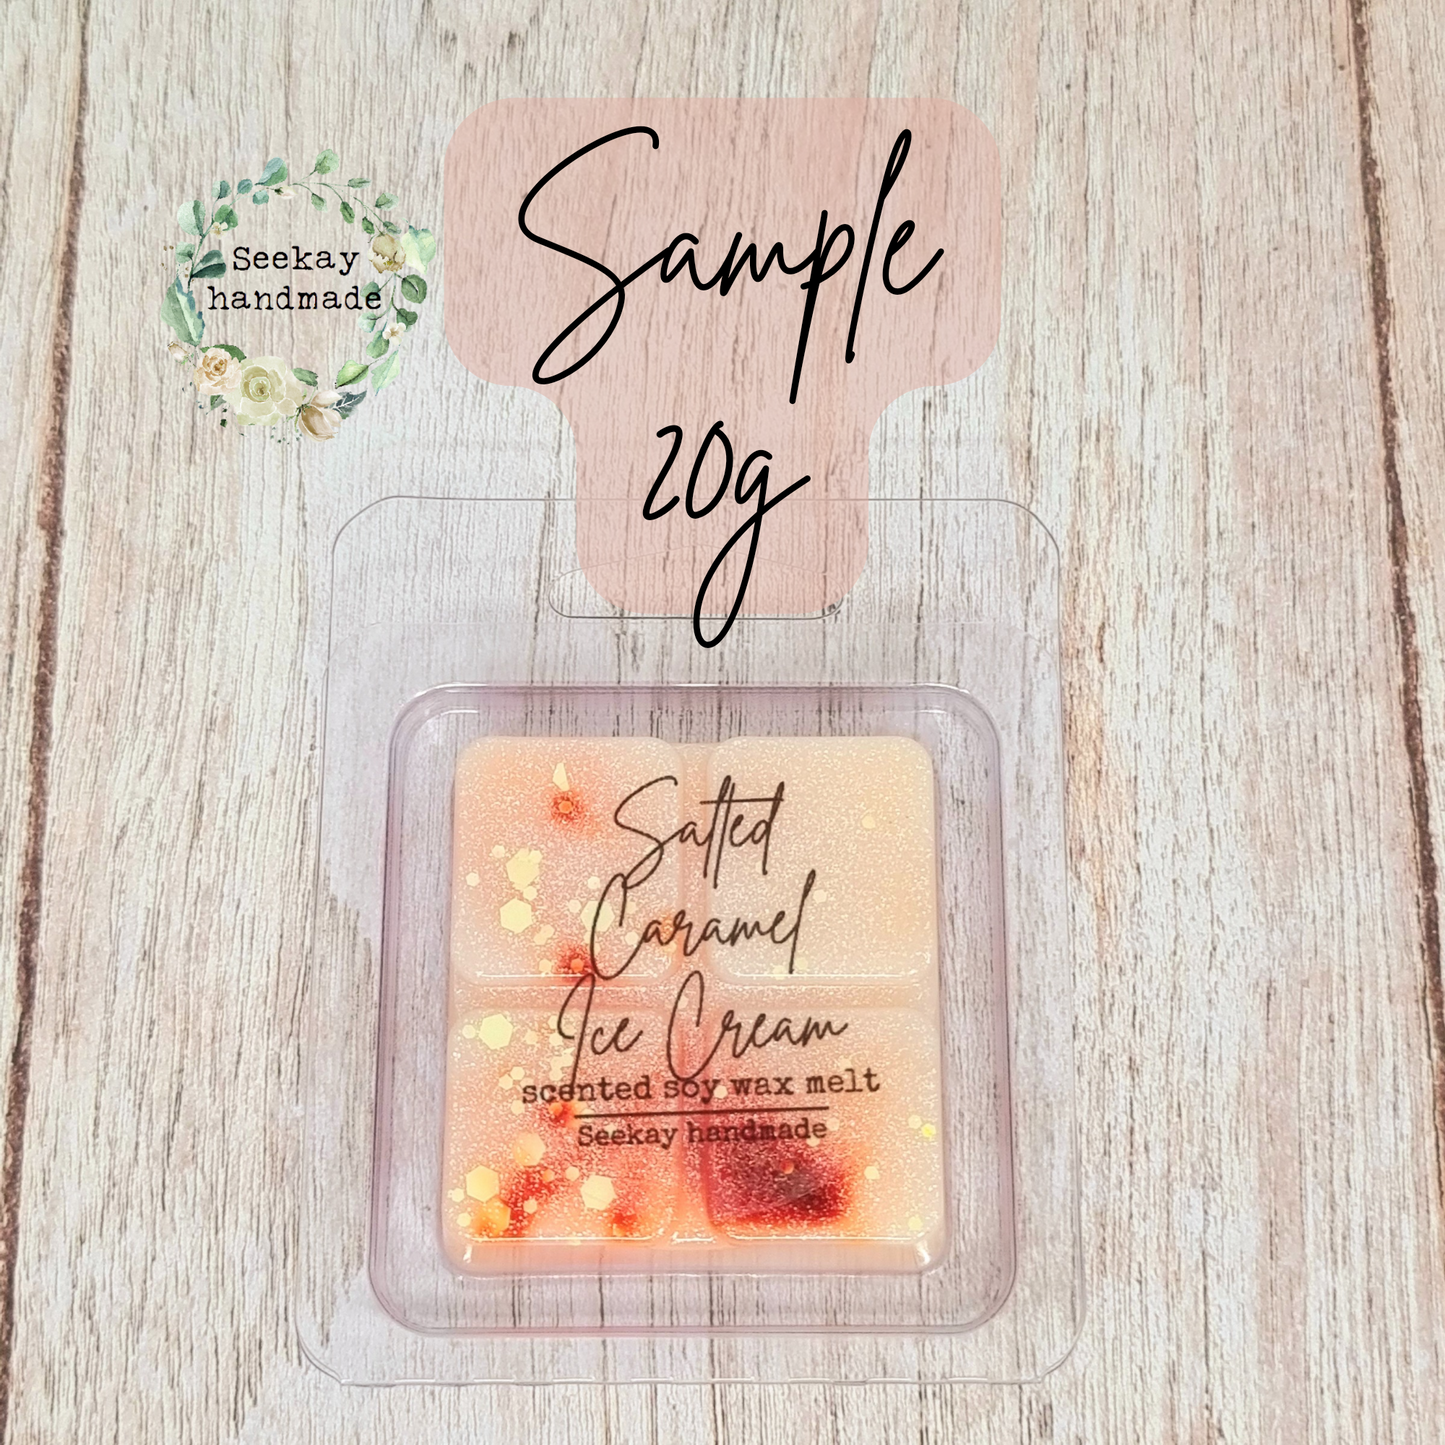 Salted Caramel Ice Cream scented soy wax melt